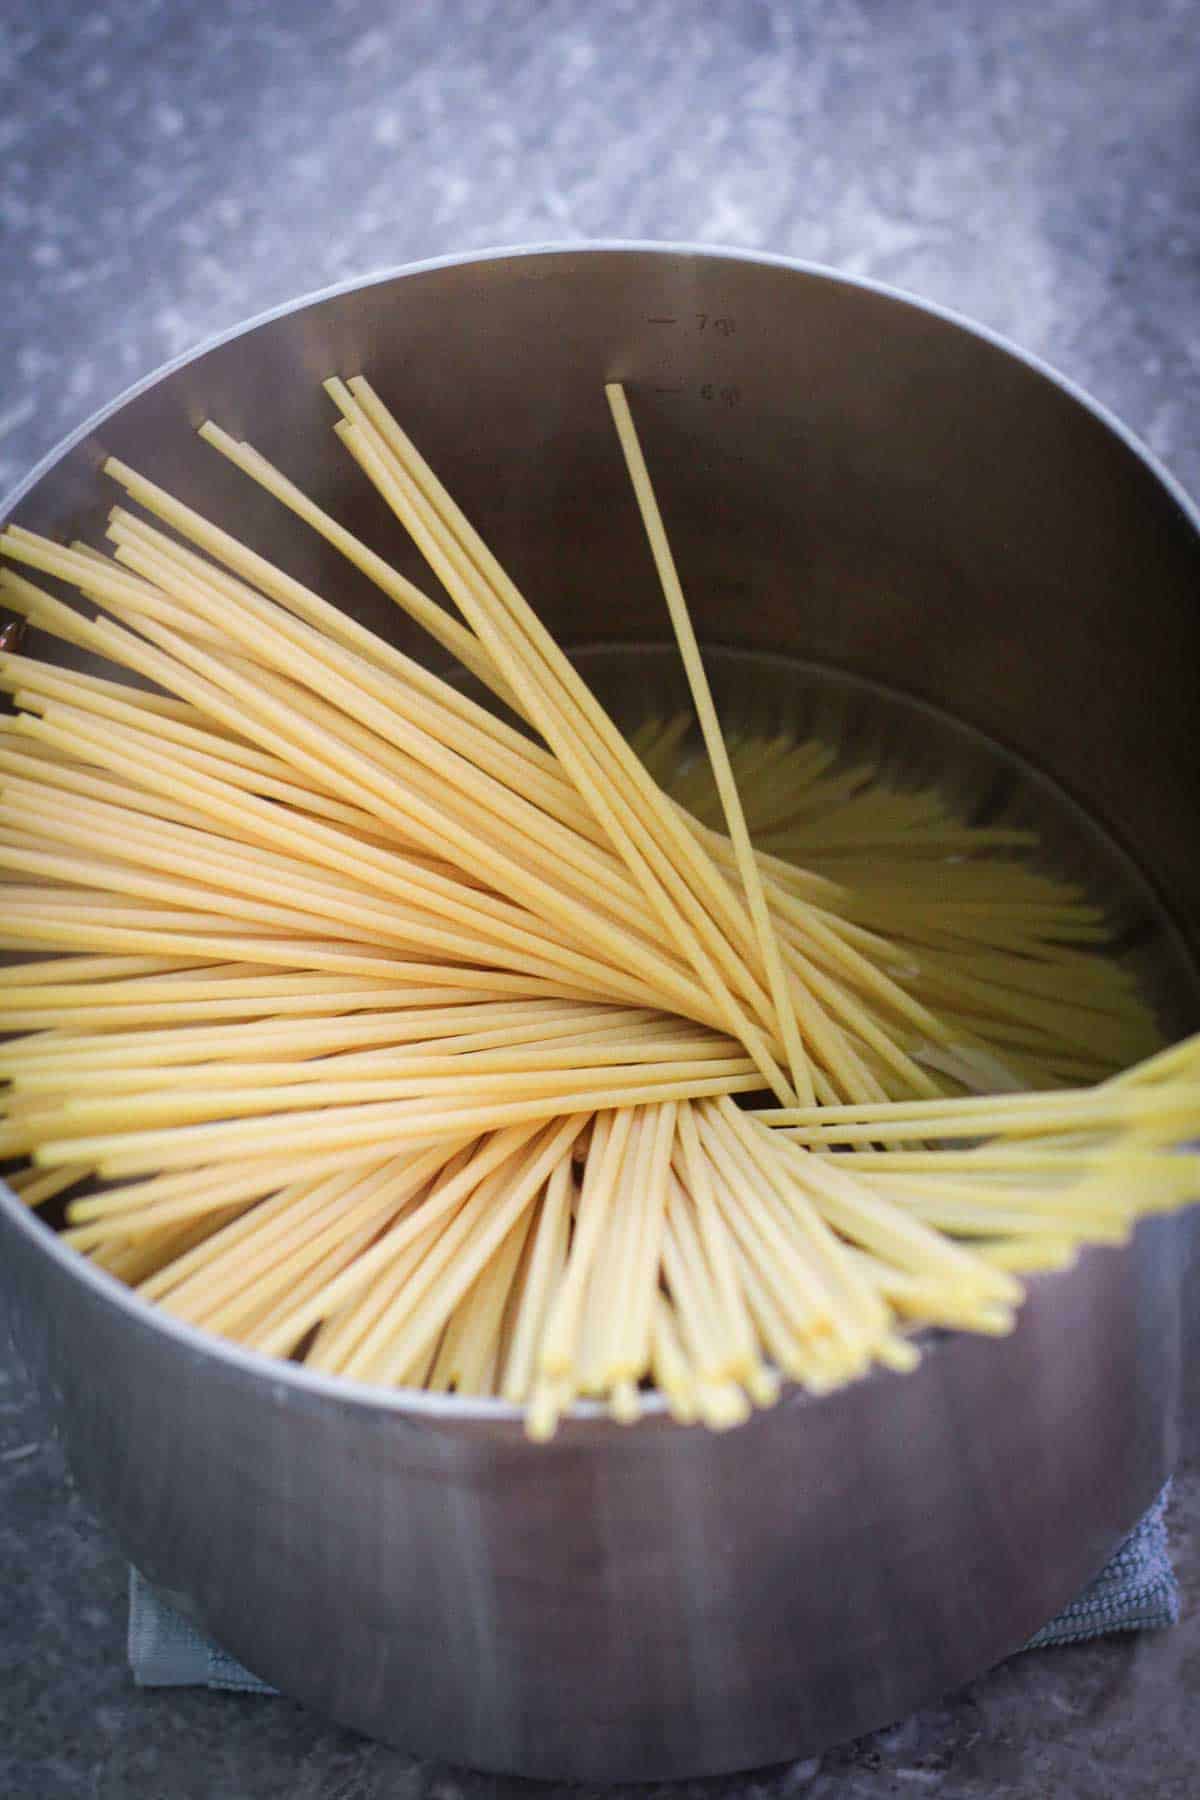 Bucatini pasta just thrown in boiling water in a big pot.